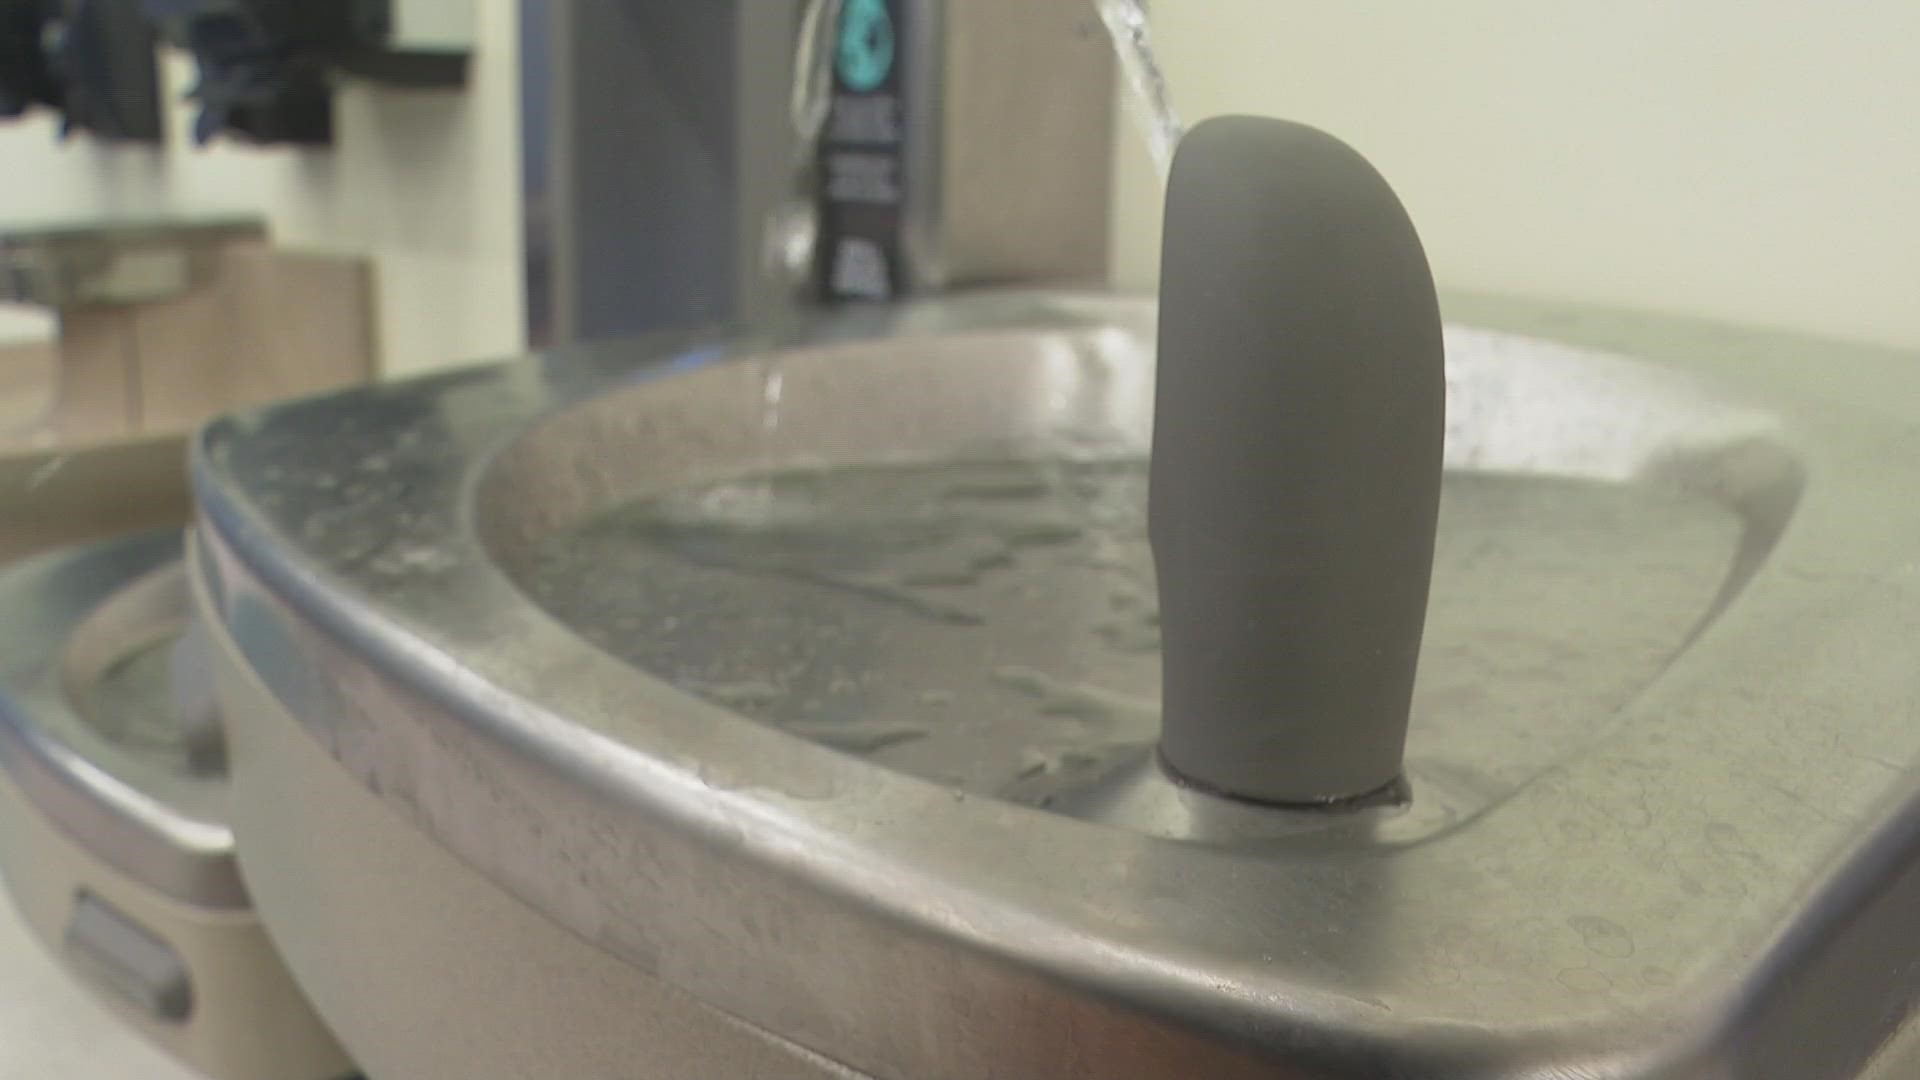 The legislature passed a law in 2019 requiring schools to test for lead in drinking water. However, about 70 of 740 schools have not yet submitted results.